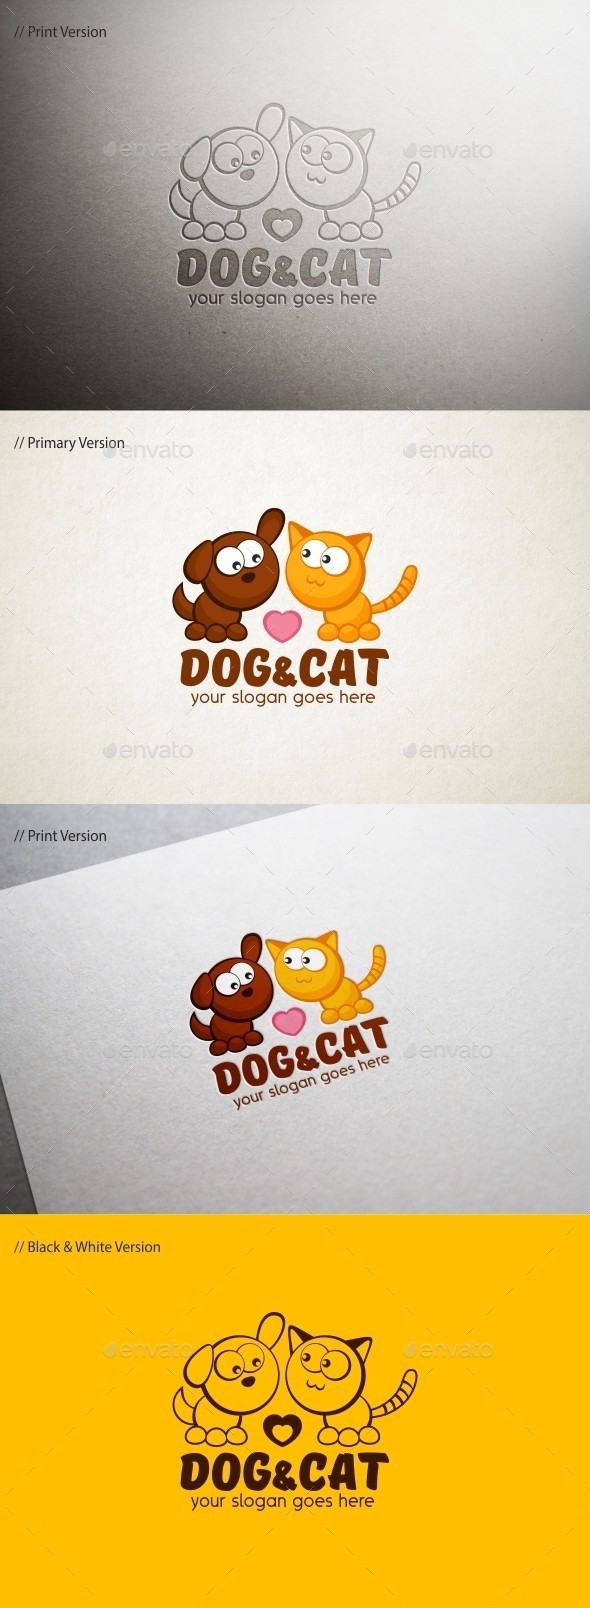 Dog 20and 20cat 20logo 20template 20590